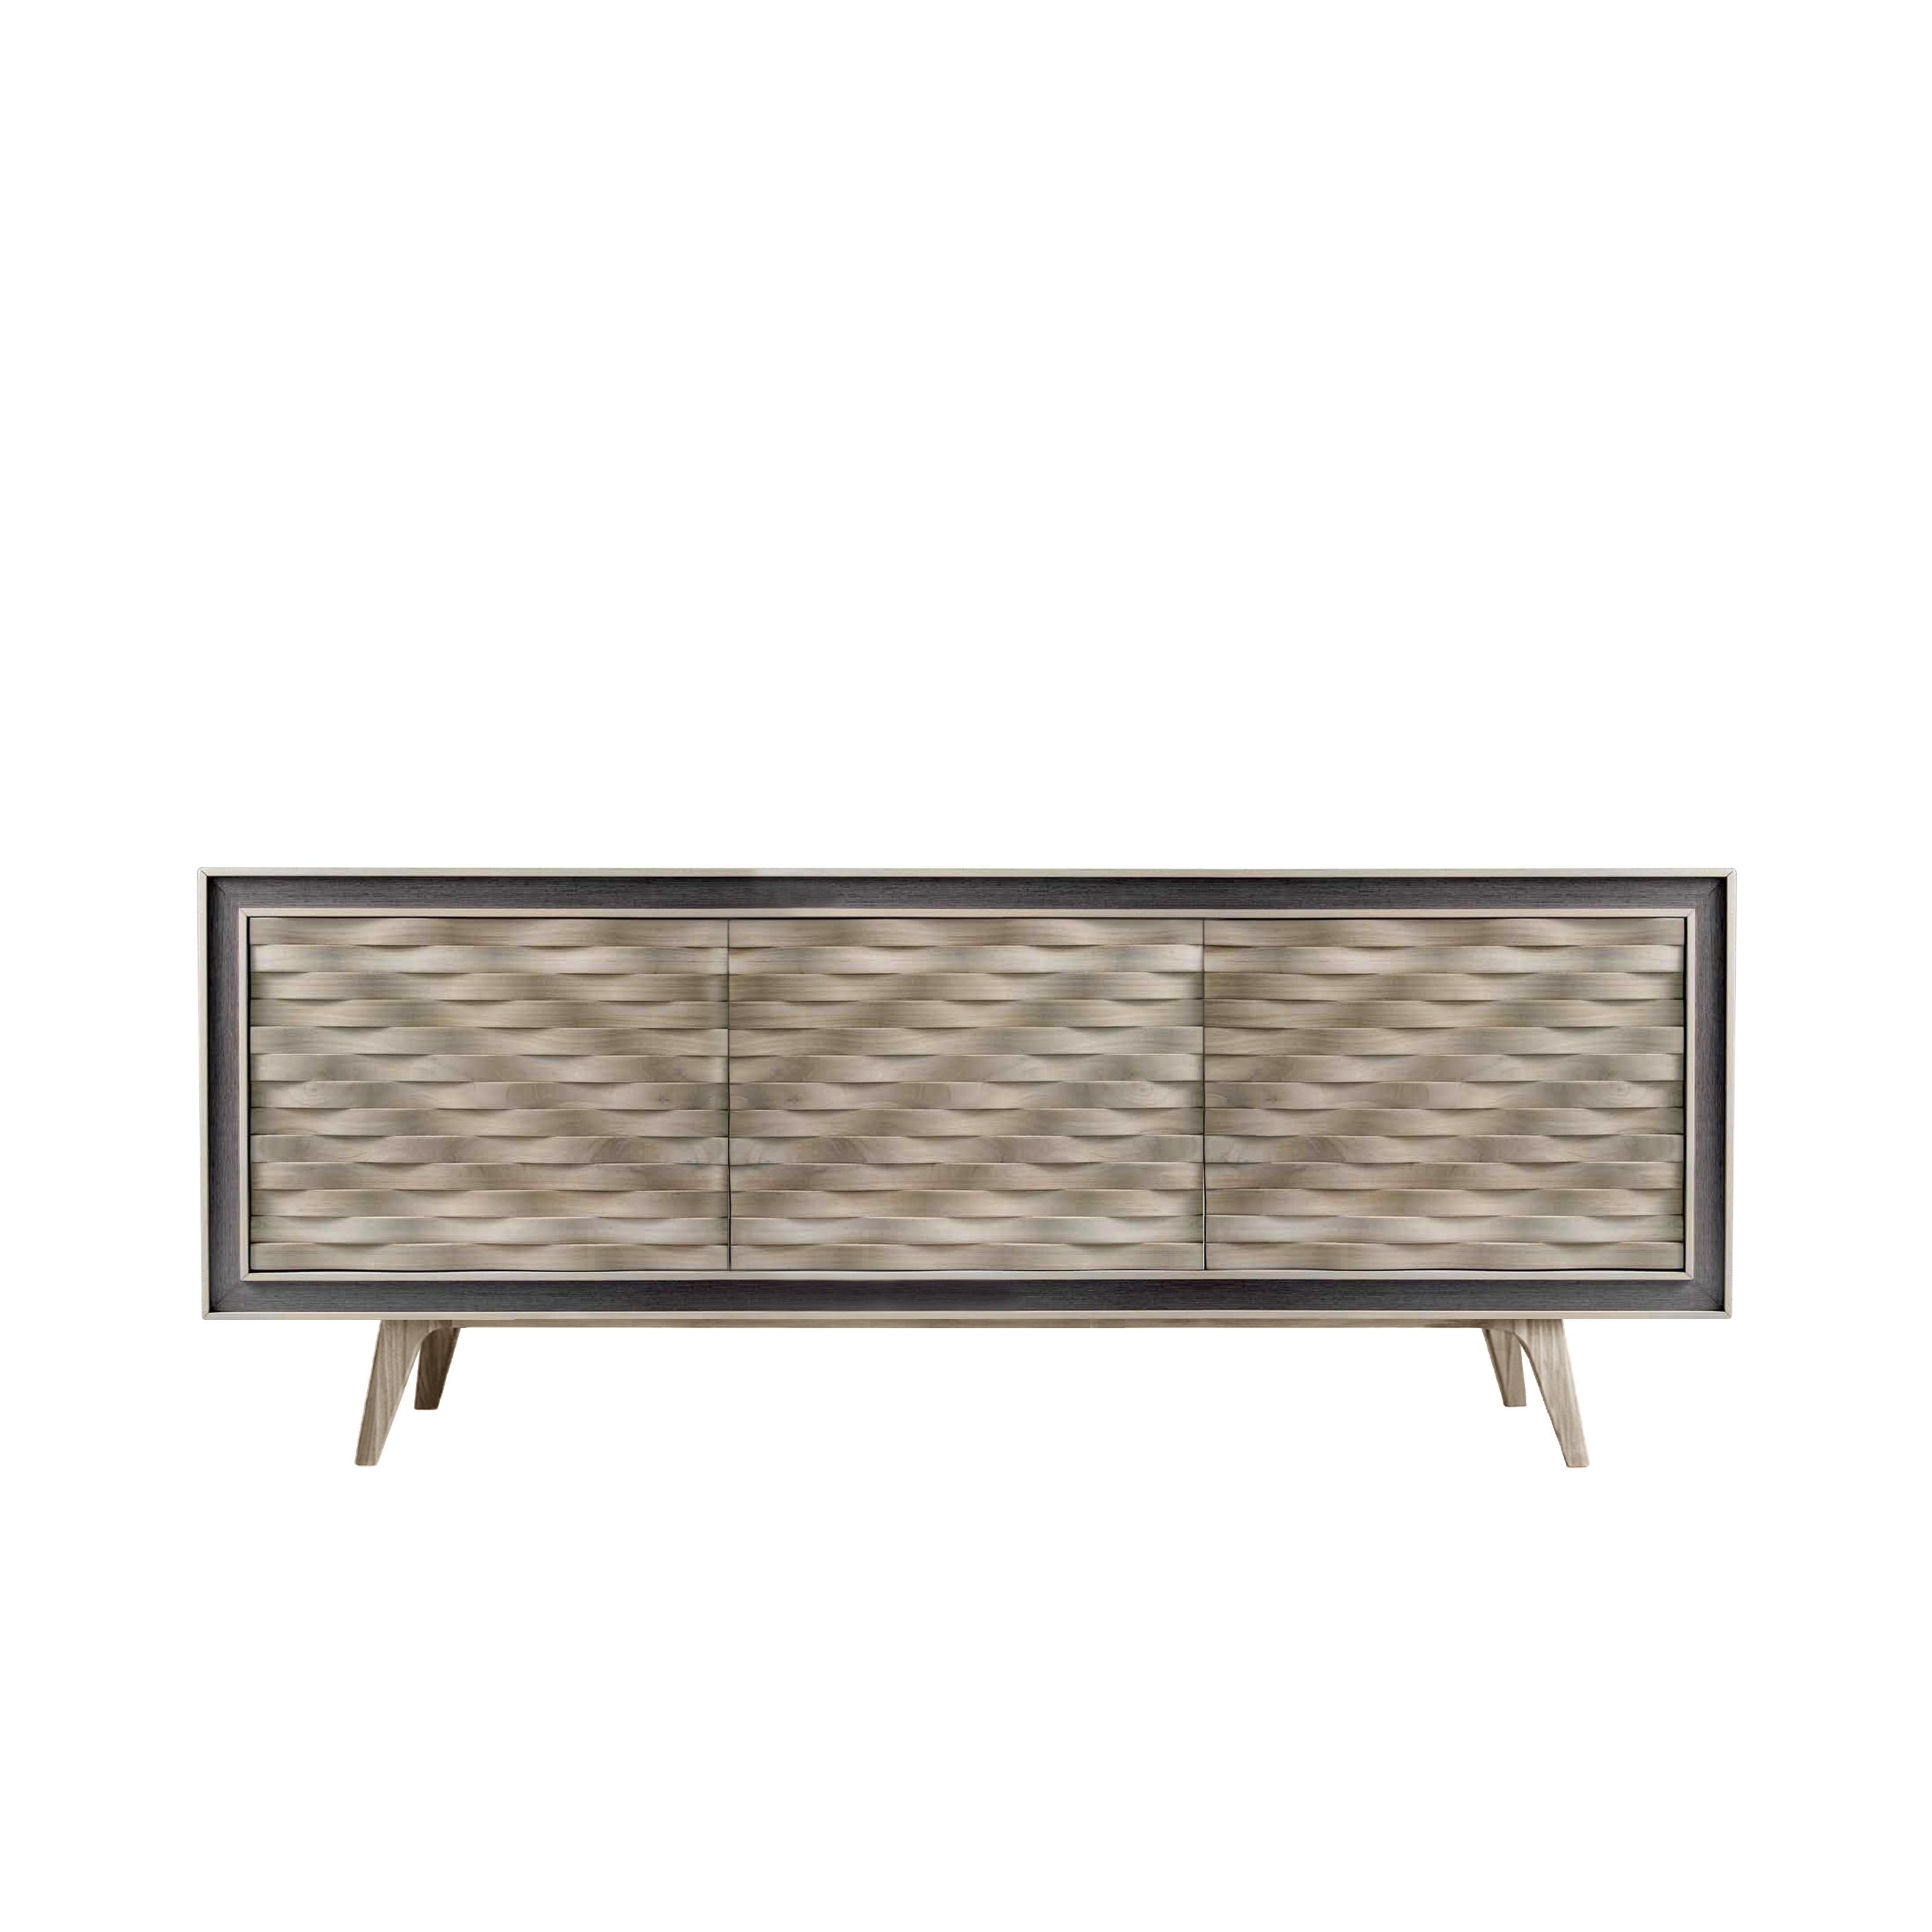 Quadra Nastro Solid Wood Sideboard, Walnut in Natural Grey Finish, Contemporary For Sale 2